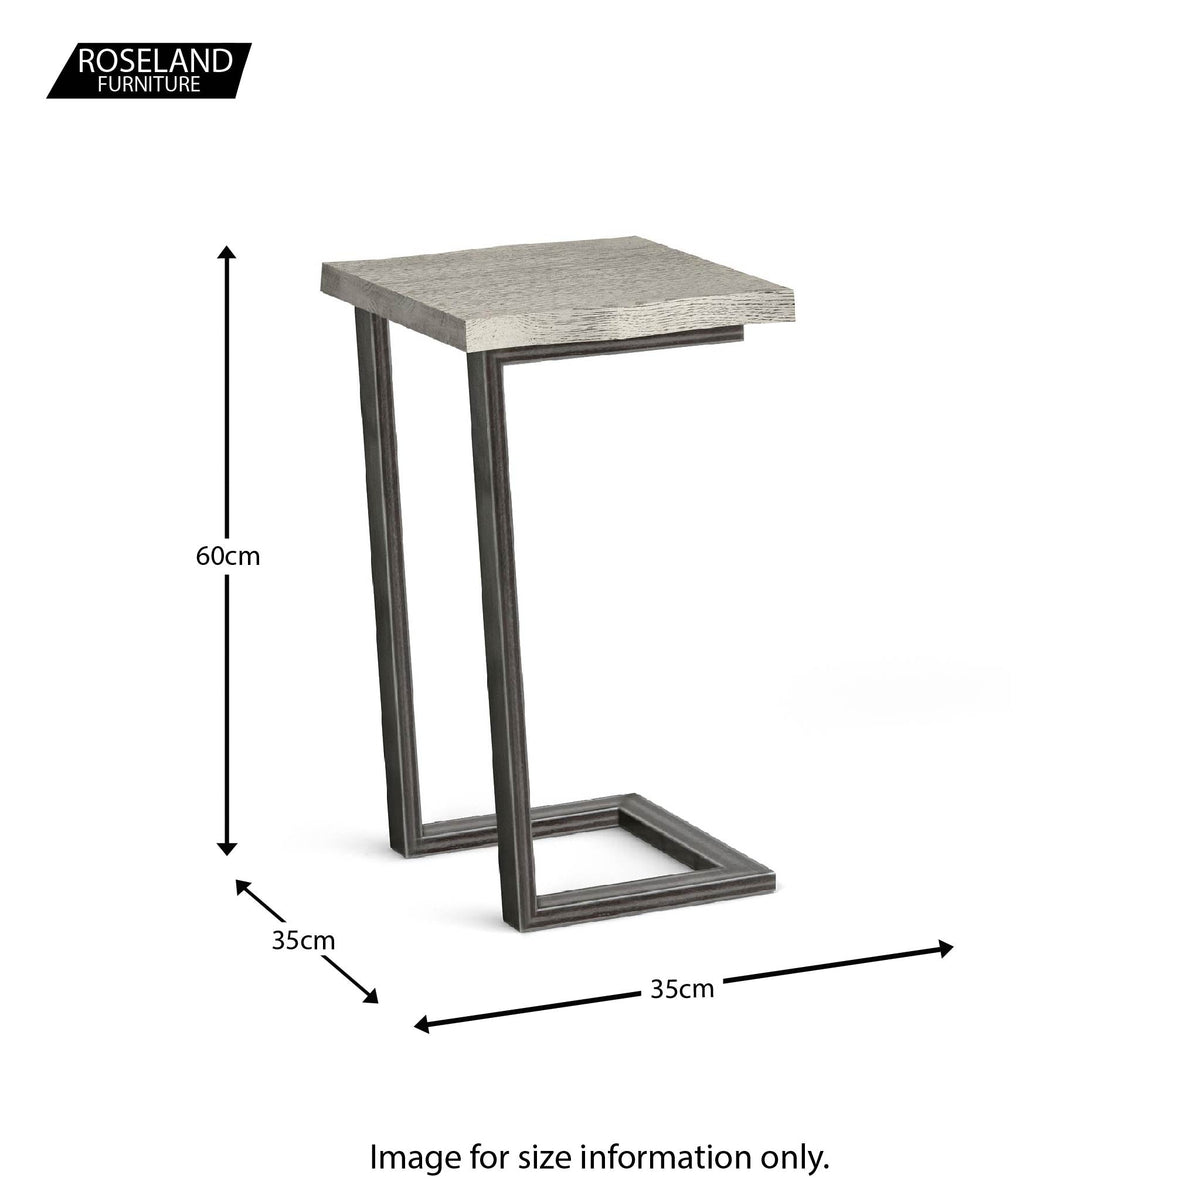 Soho Side Occasional Table - size guide